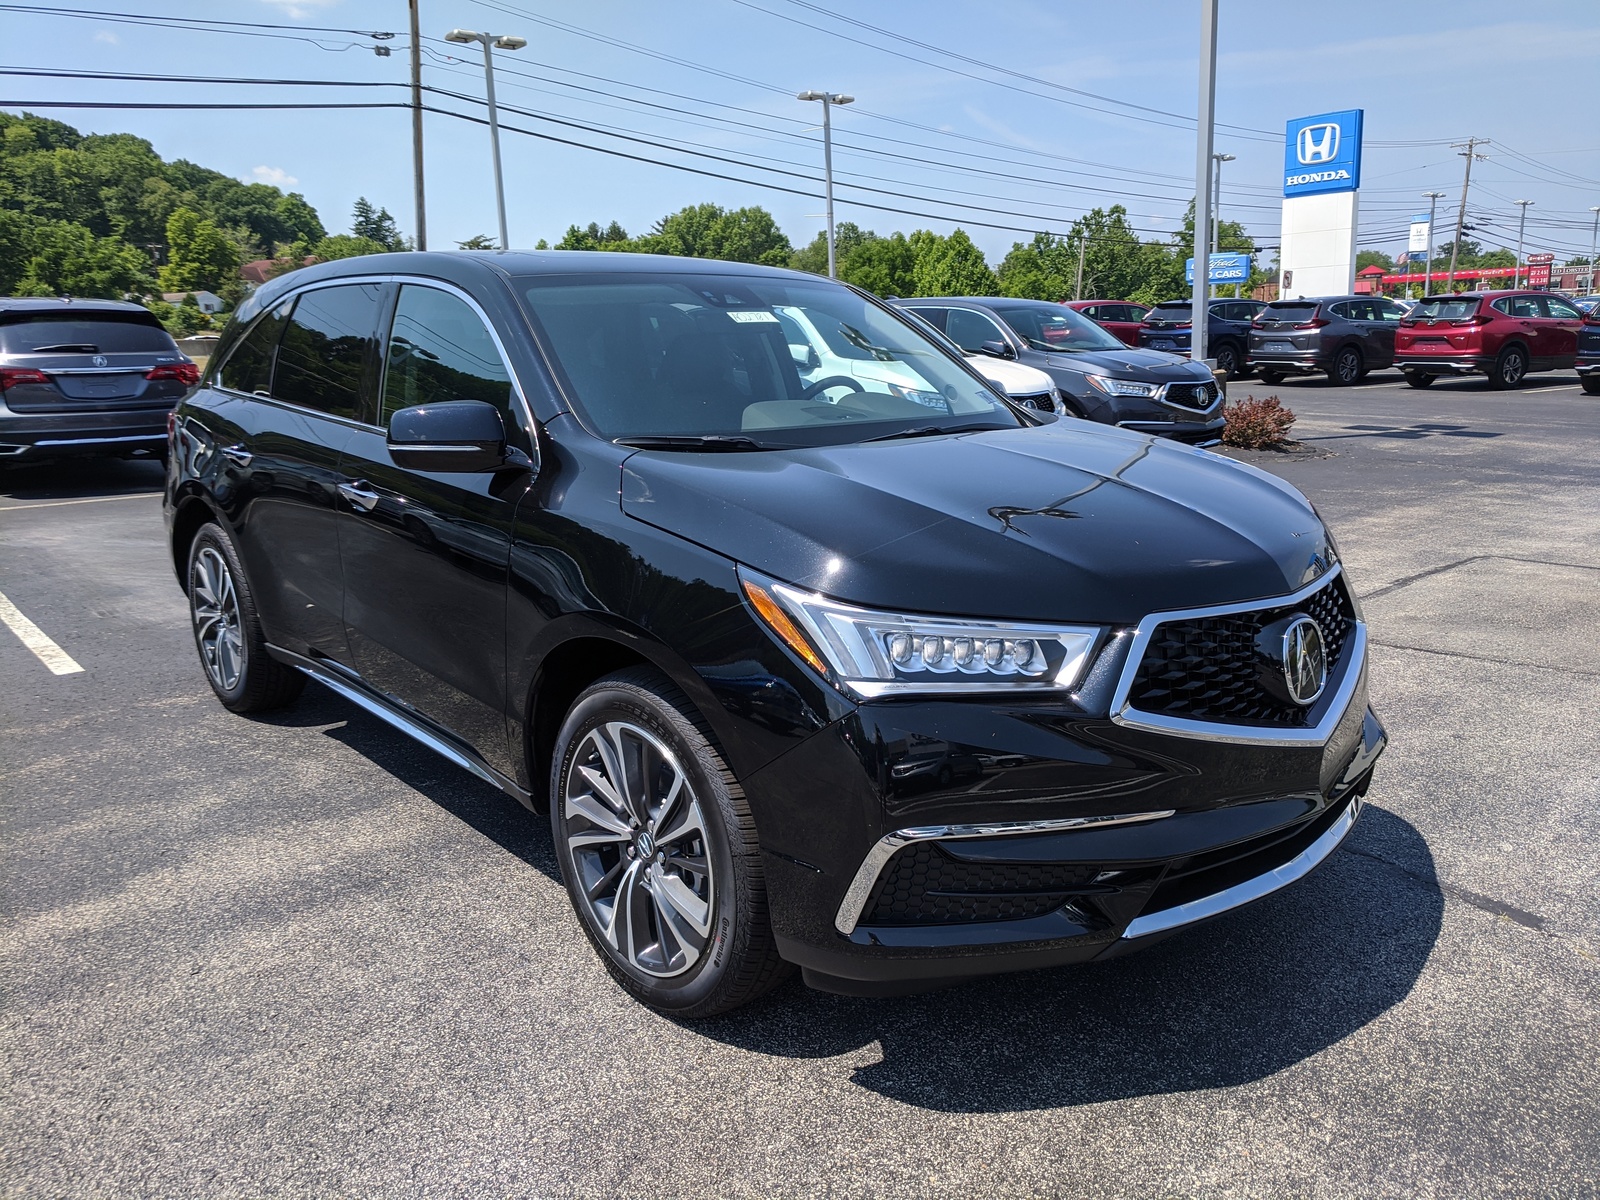 New 2020 Acura Mdx Sh Awd With Technology Package In Majestic Black